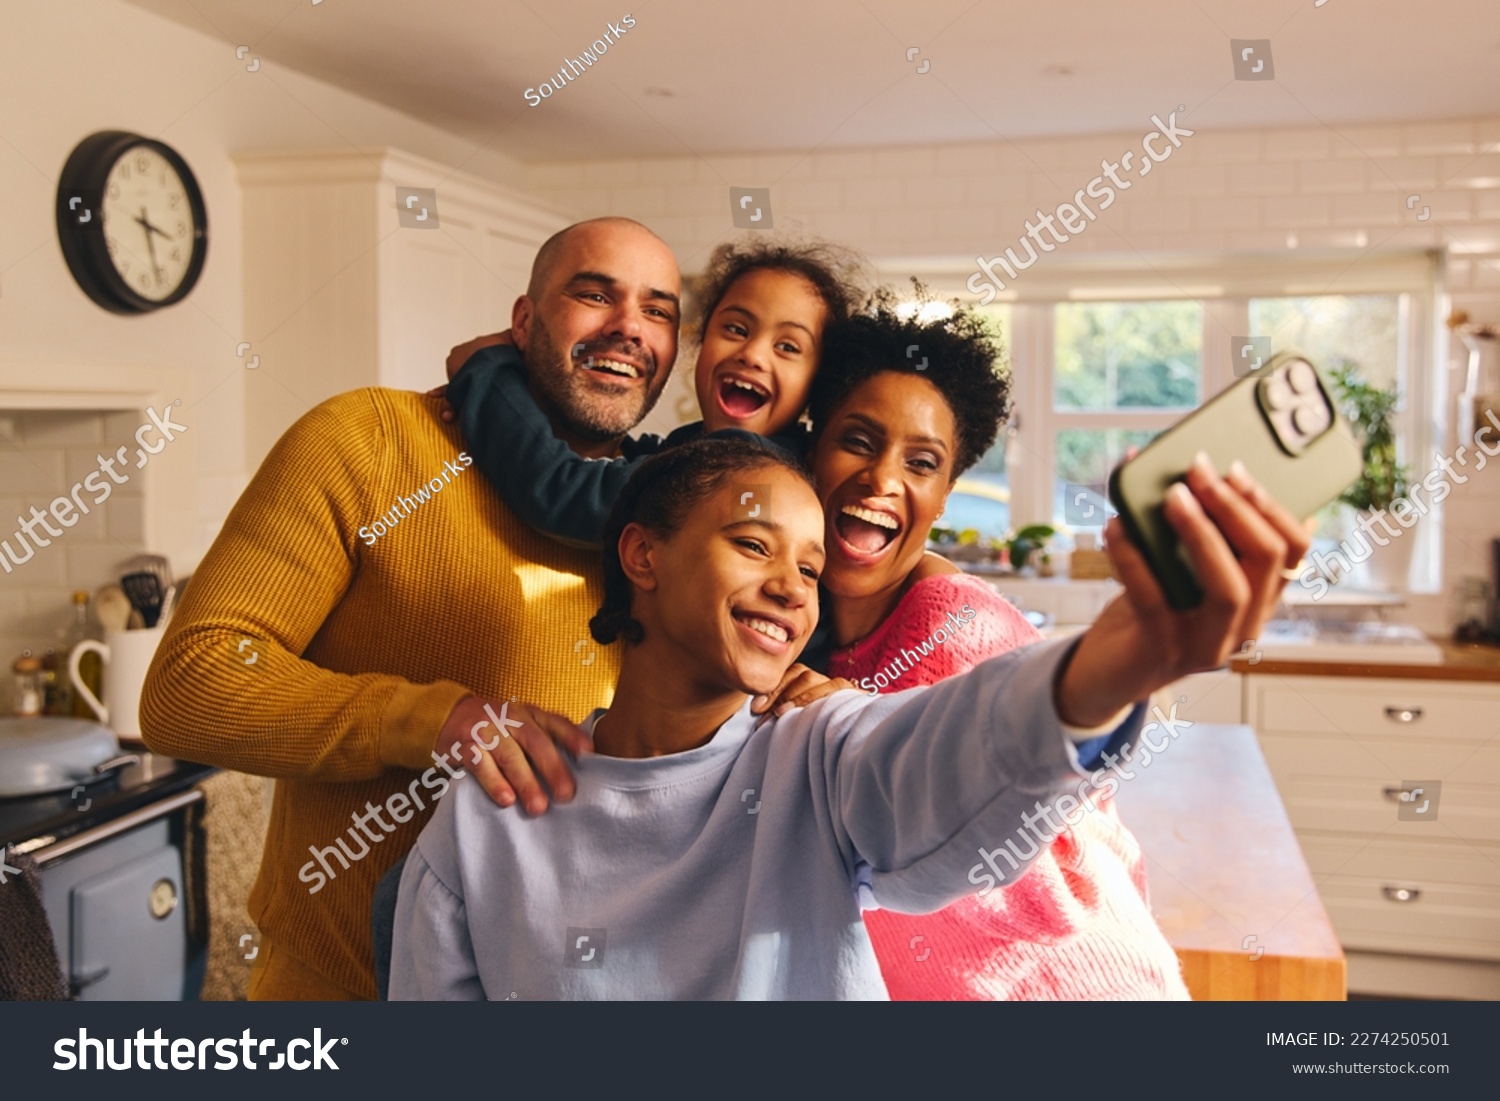 Teen girl taking selfie on phone with happy smiling family #2274250501